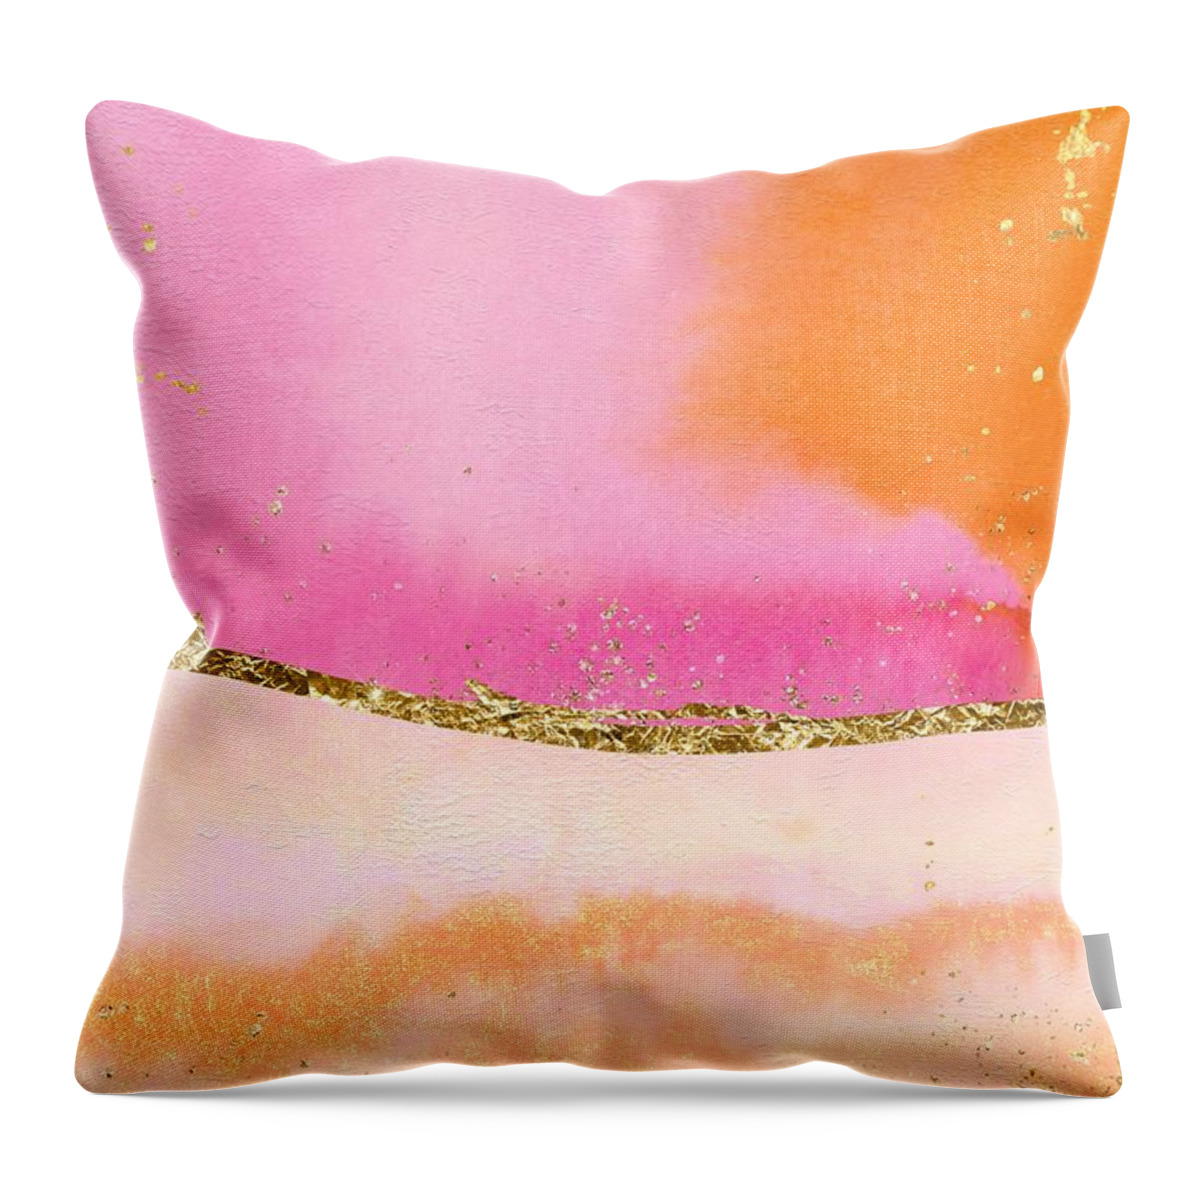 Orange Throw Pillow featuring the painting Orange, Gold And Pink by Modern Art